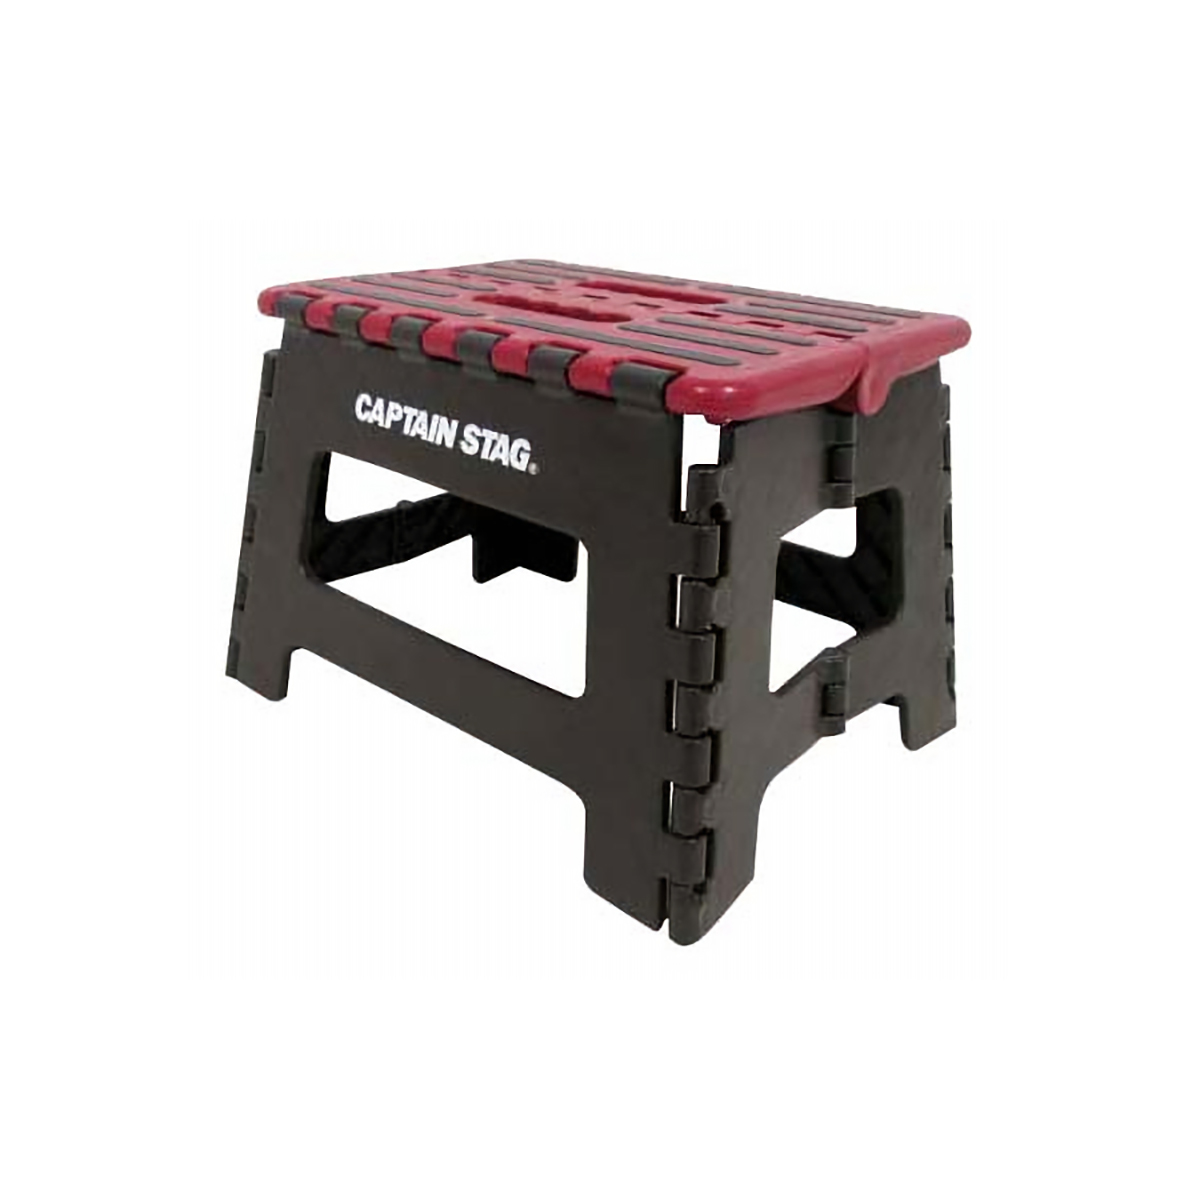 CAPTAIN STAG FOLDABLE STEP S (RED)